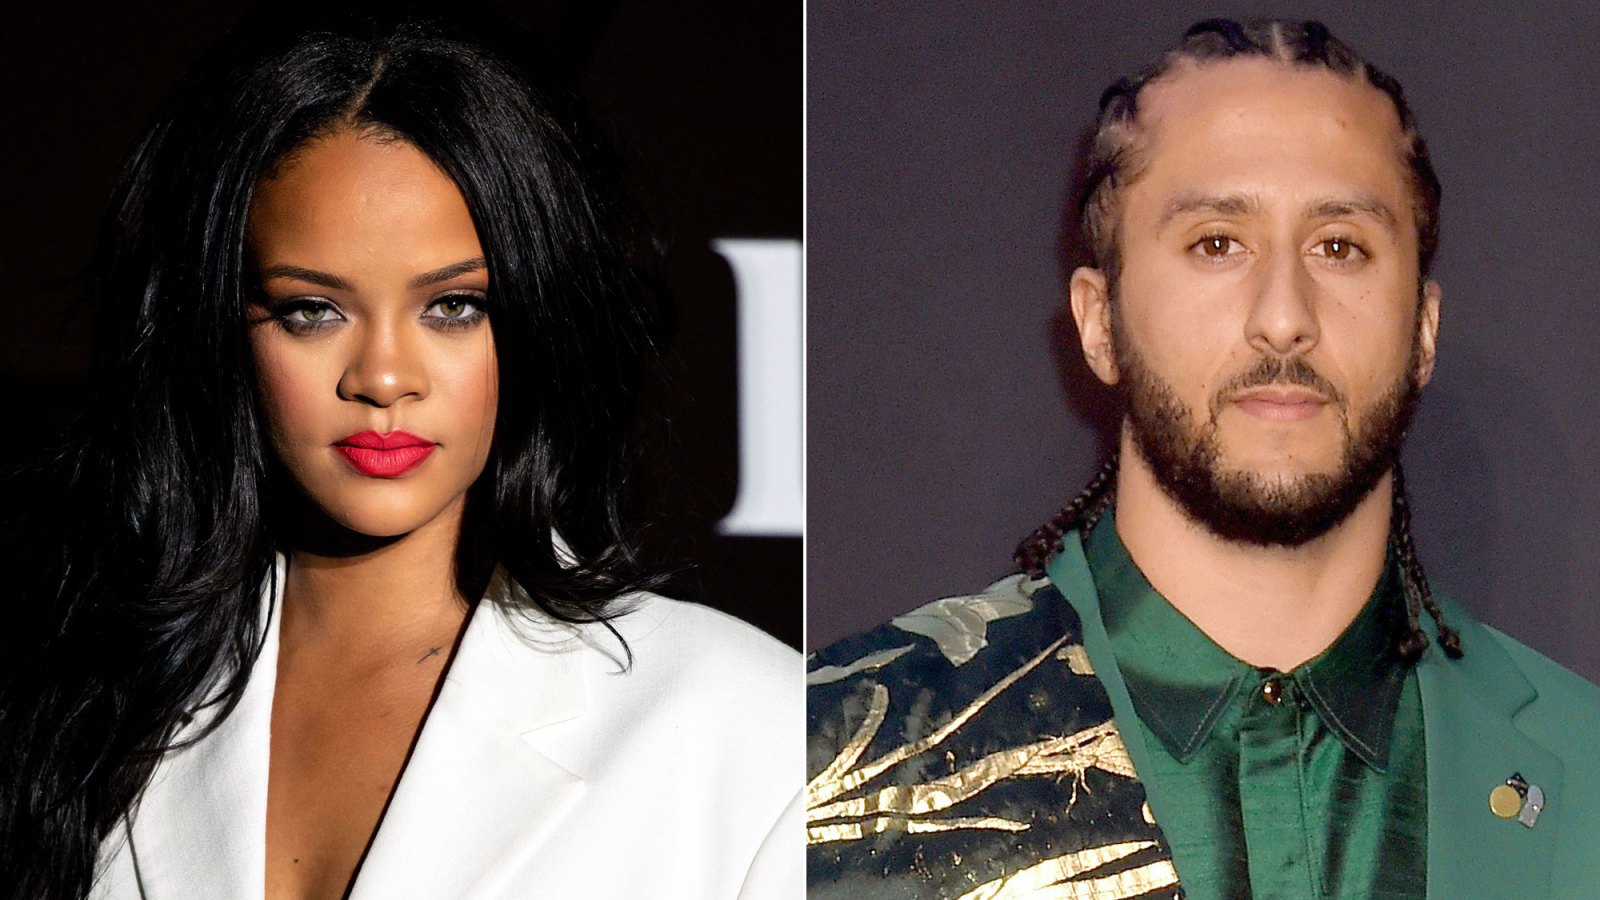 Rihanna Confirms She Turned Down Super Bowl Halftime Show in Solidarity With Colin Kaepernick